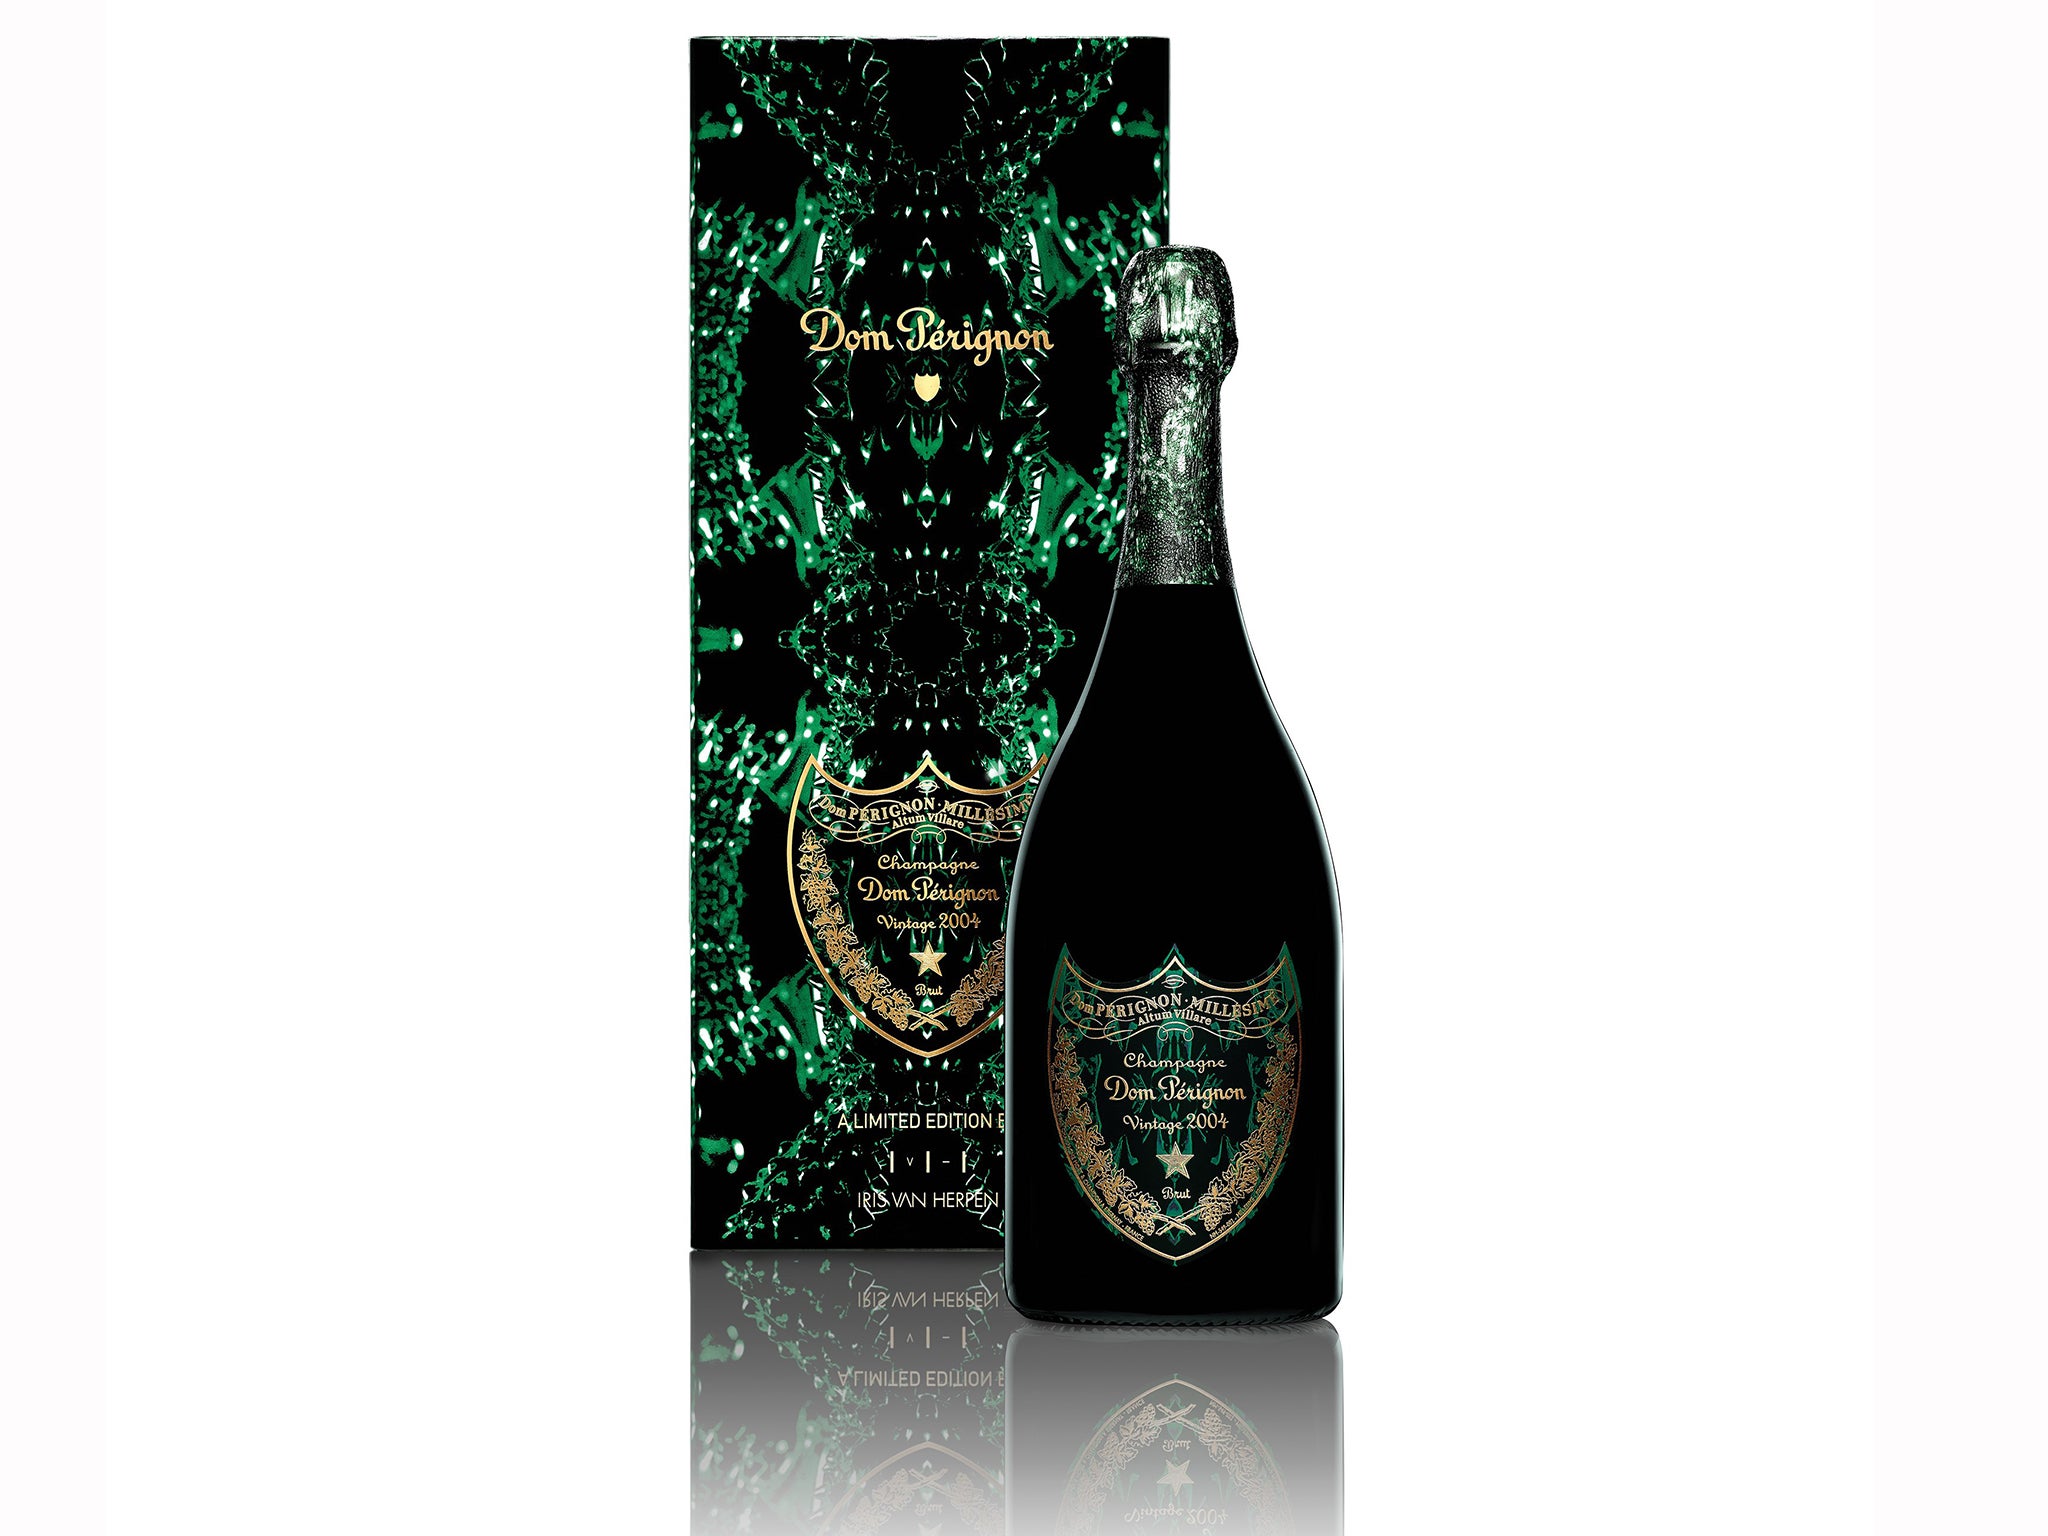 Bewitching bottle: Dom Pérignon’s new label and box, created by fashion designer Iris Van Herpen